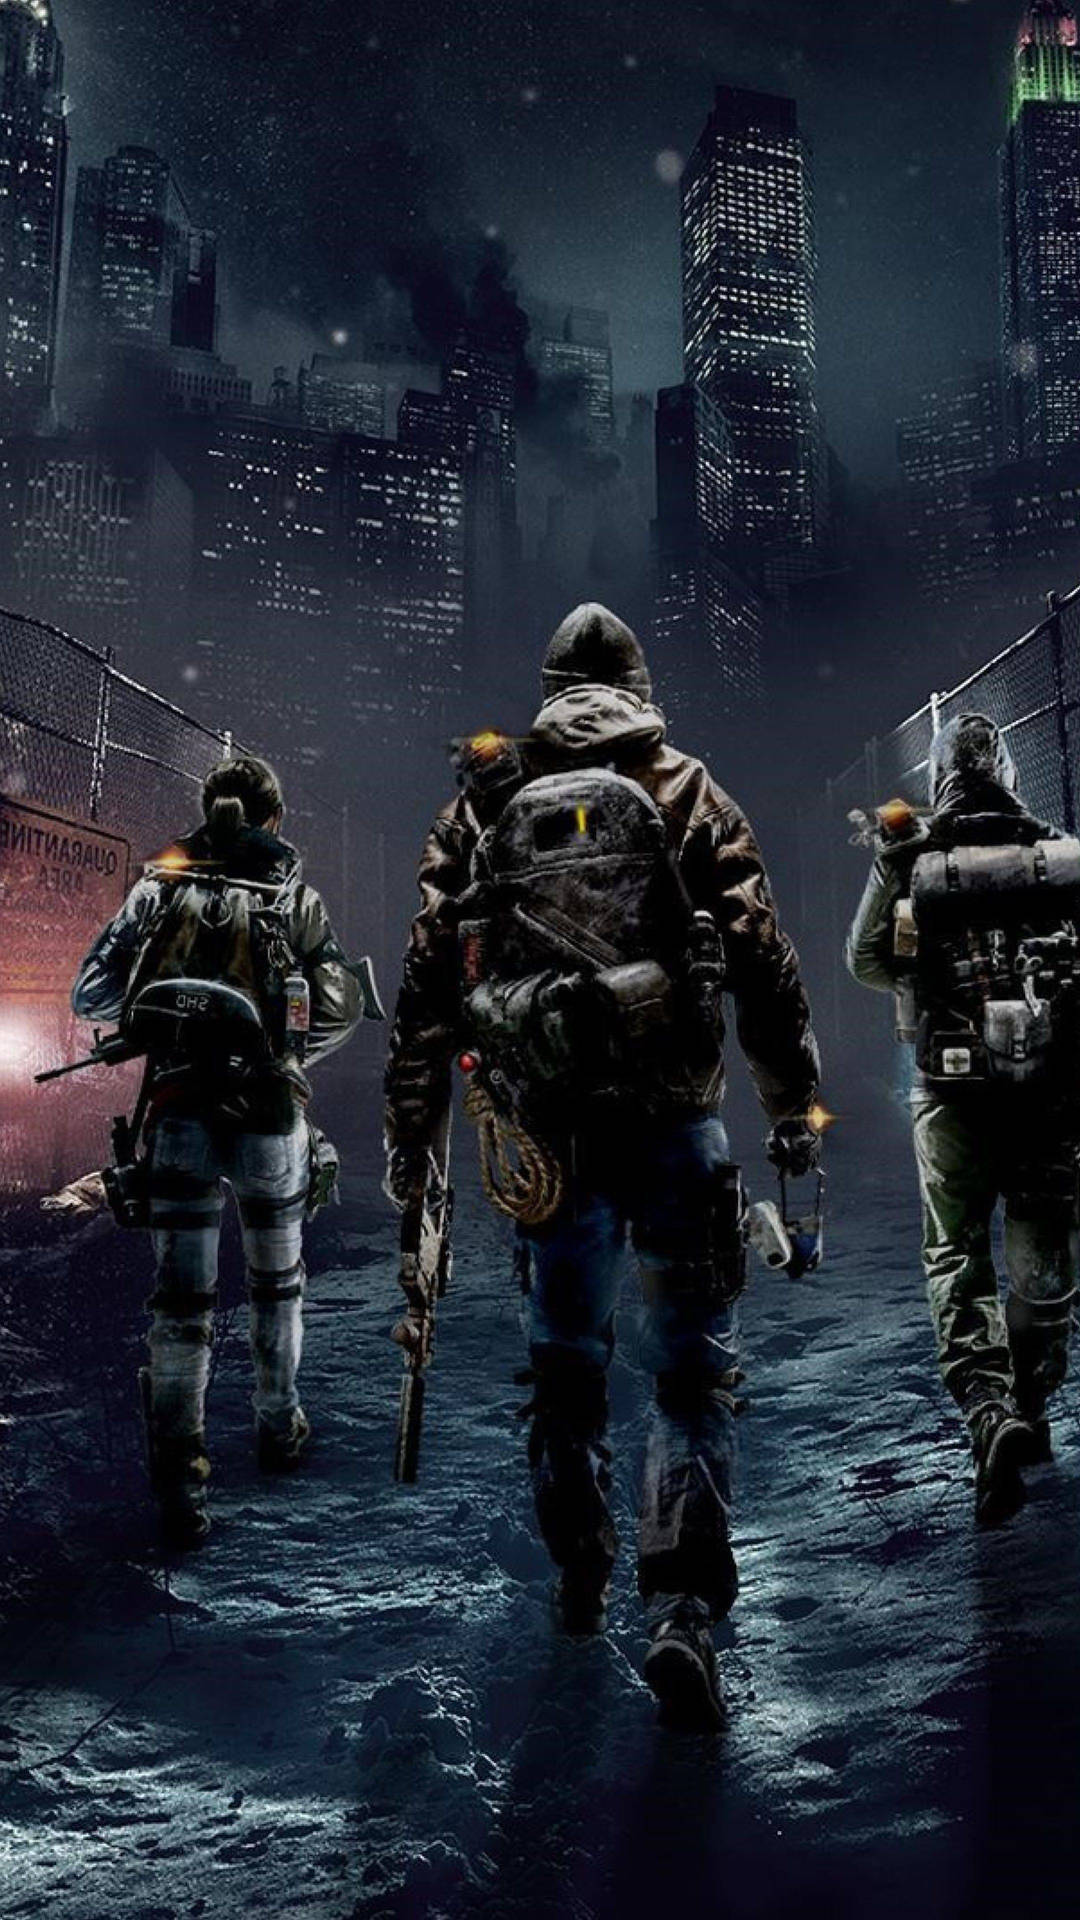 Journey through the night in The Division 2 Wallpaper